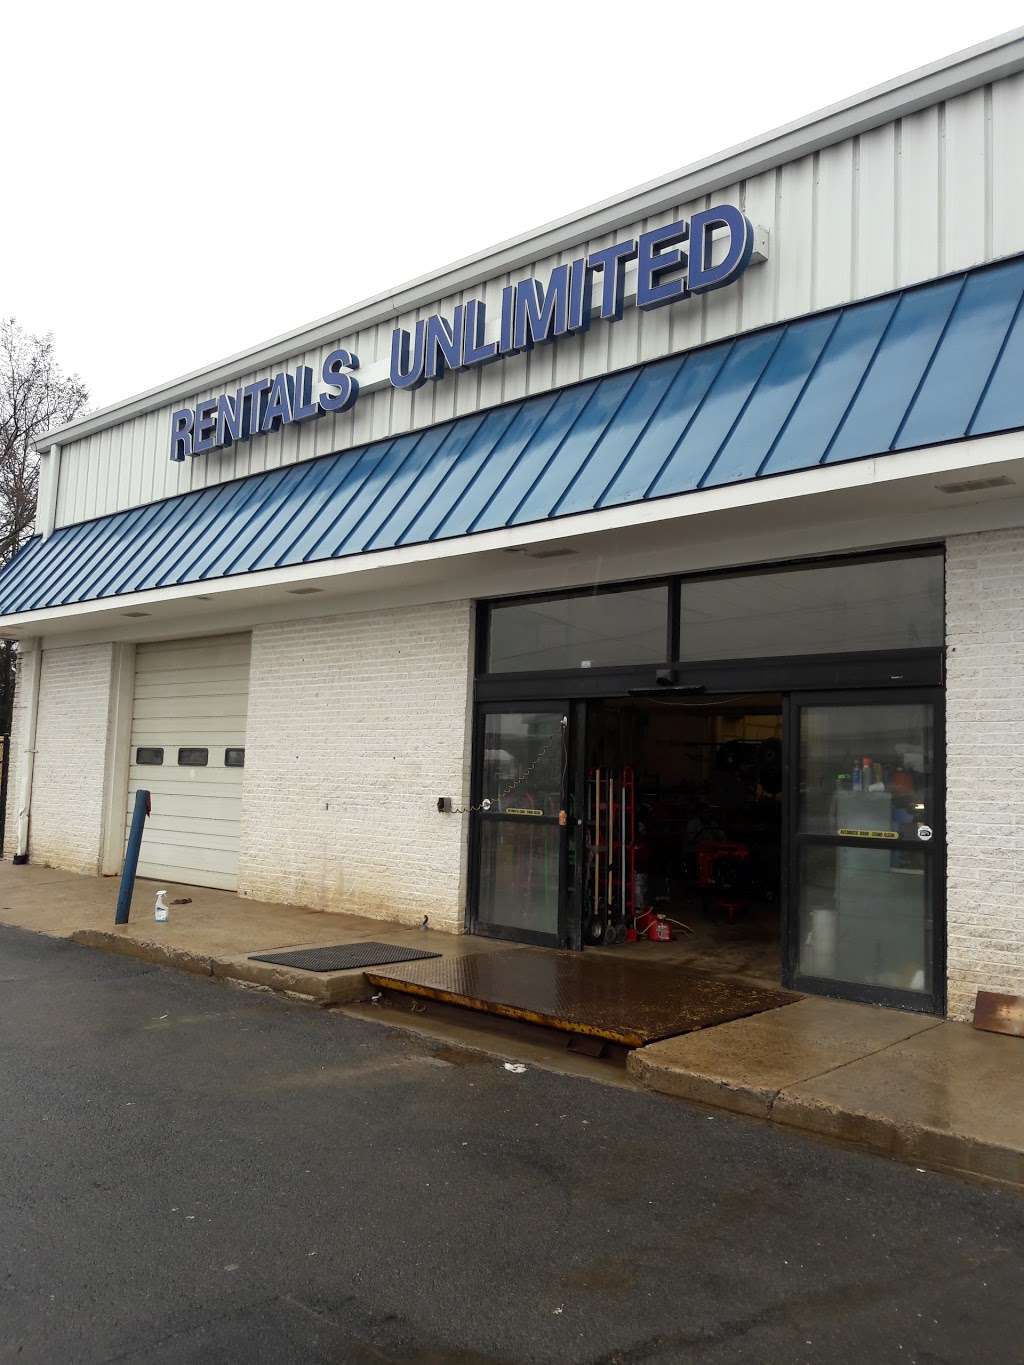 Rentals Unlimited Inc | 44783 Old Ox Rd, Sterling, VA 20166 | Phone: (703) 709-9300